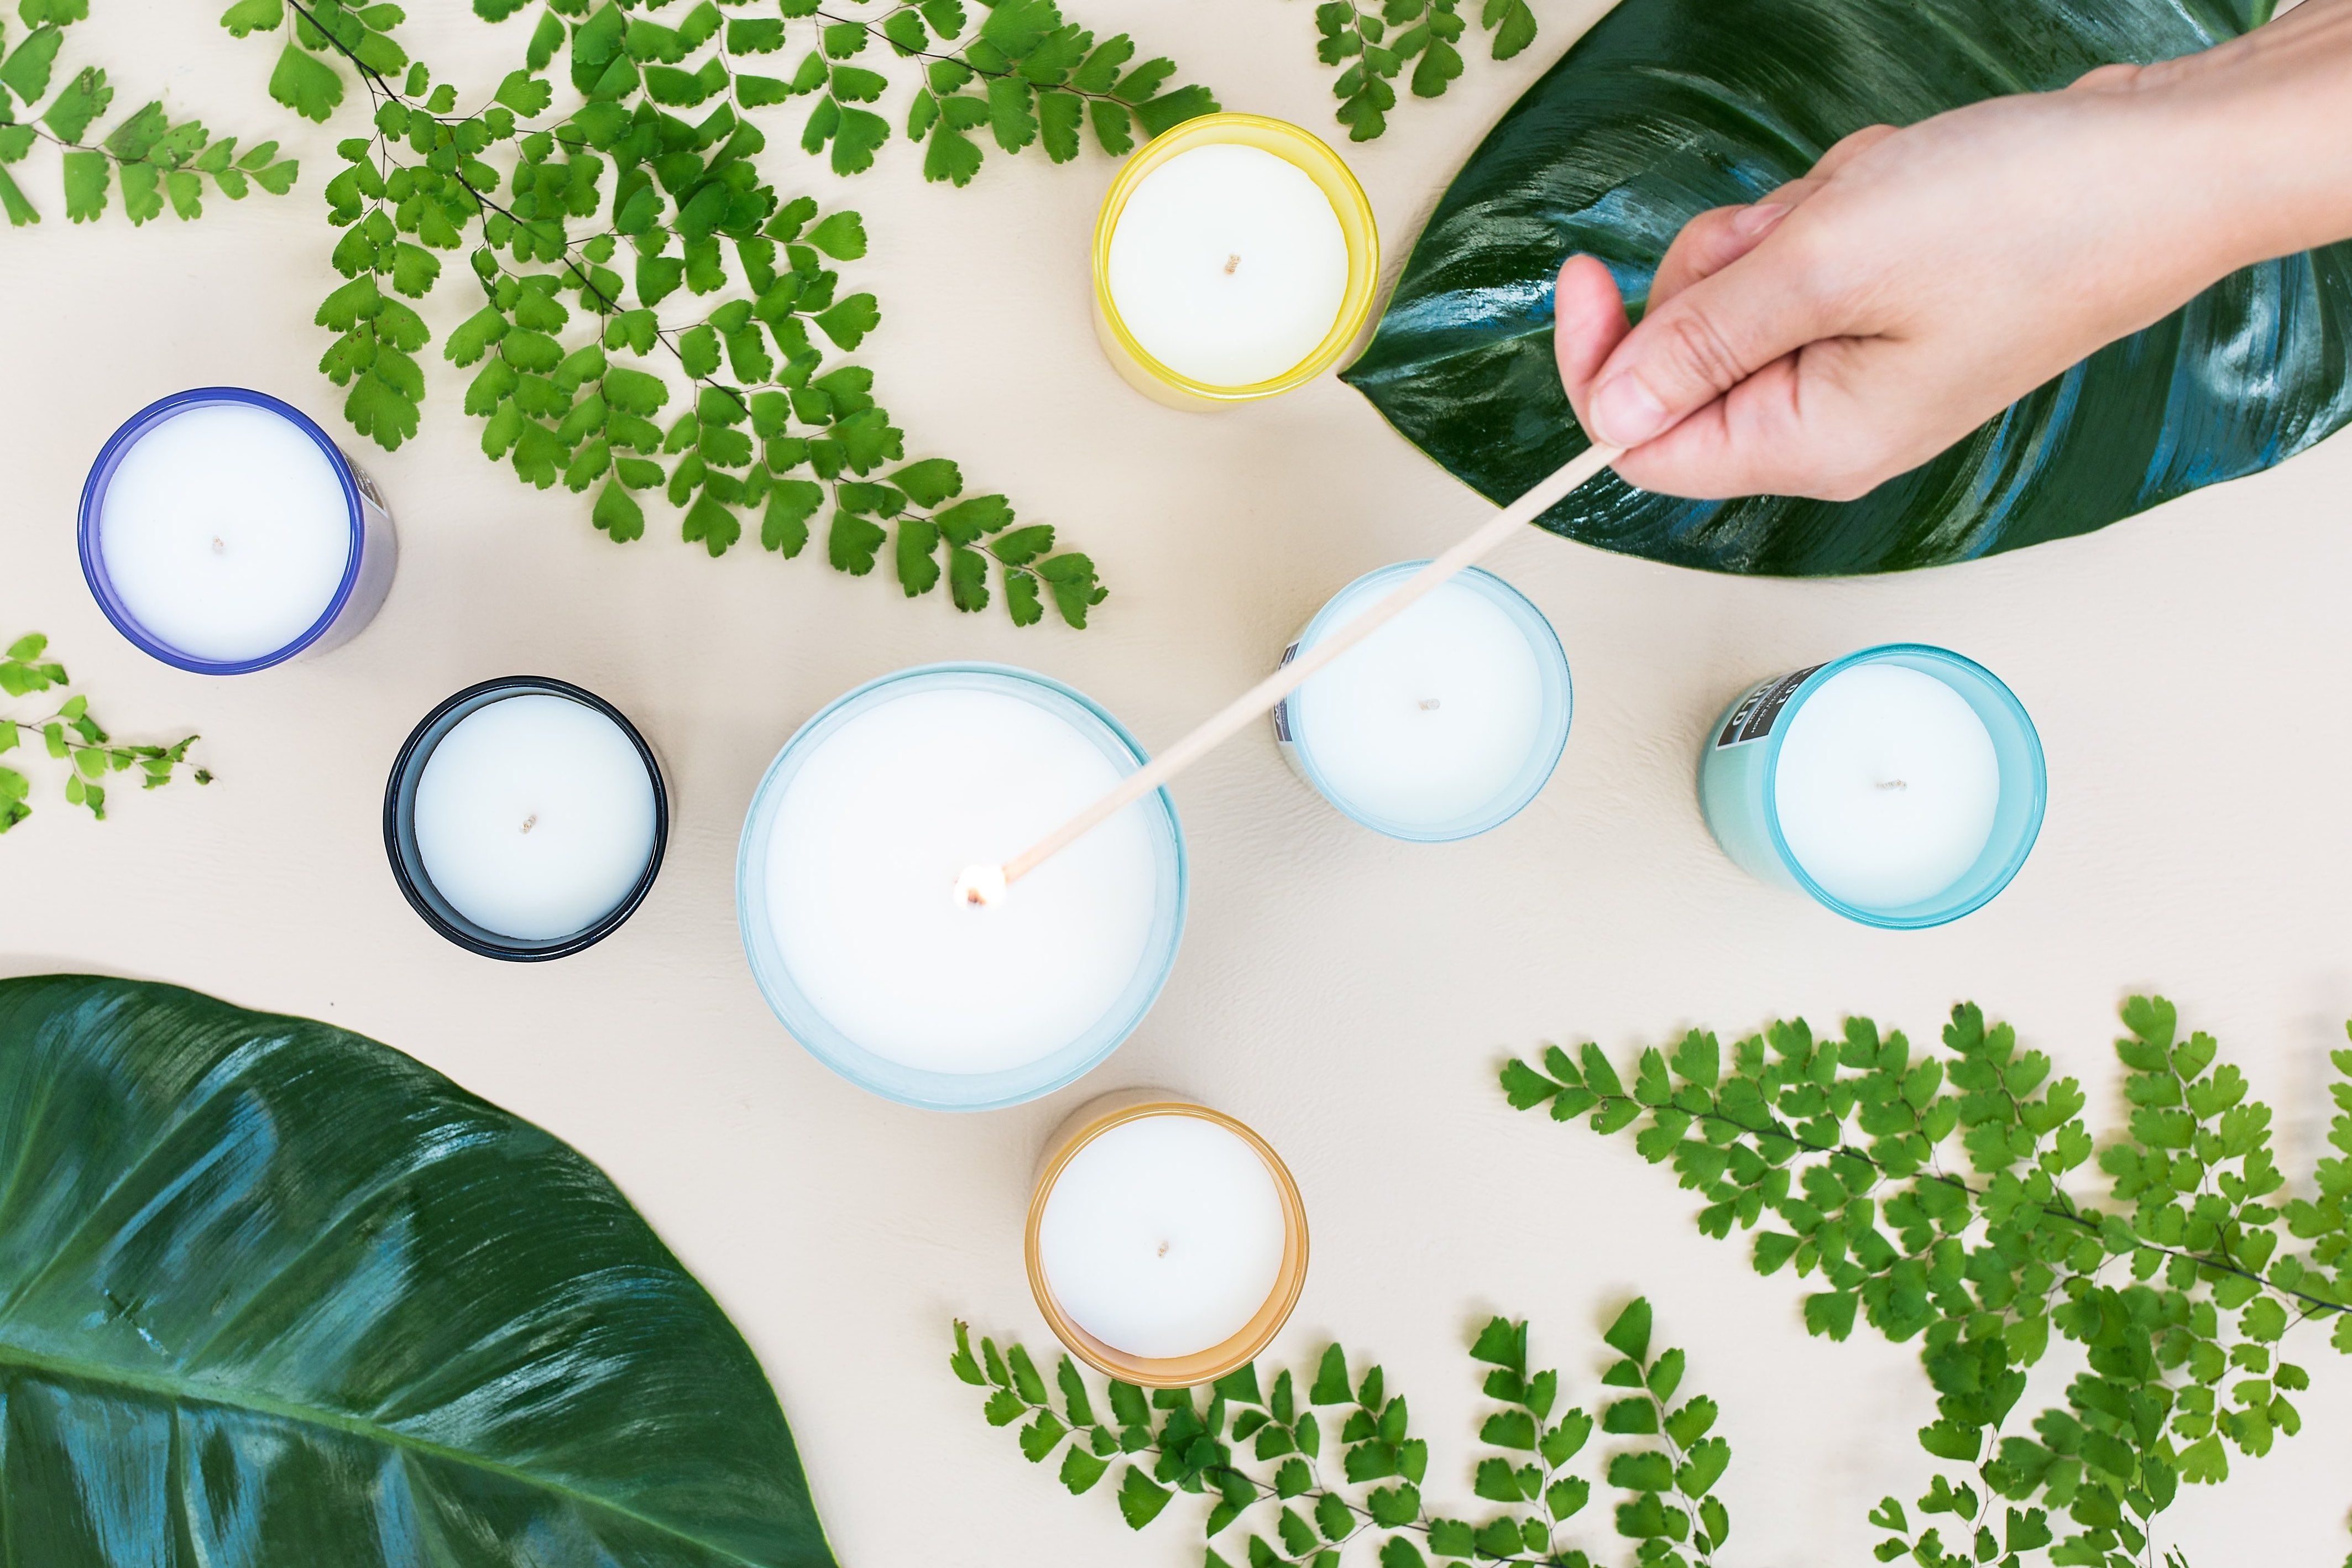 The 7 Luxury Candles, Incense and Essential Oils We’re Burning at Home